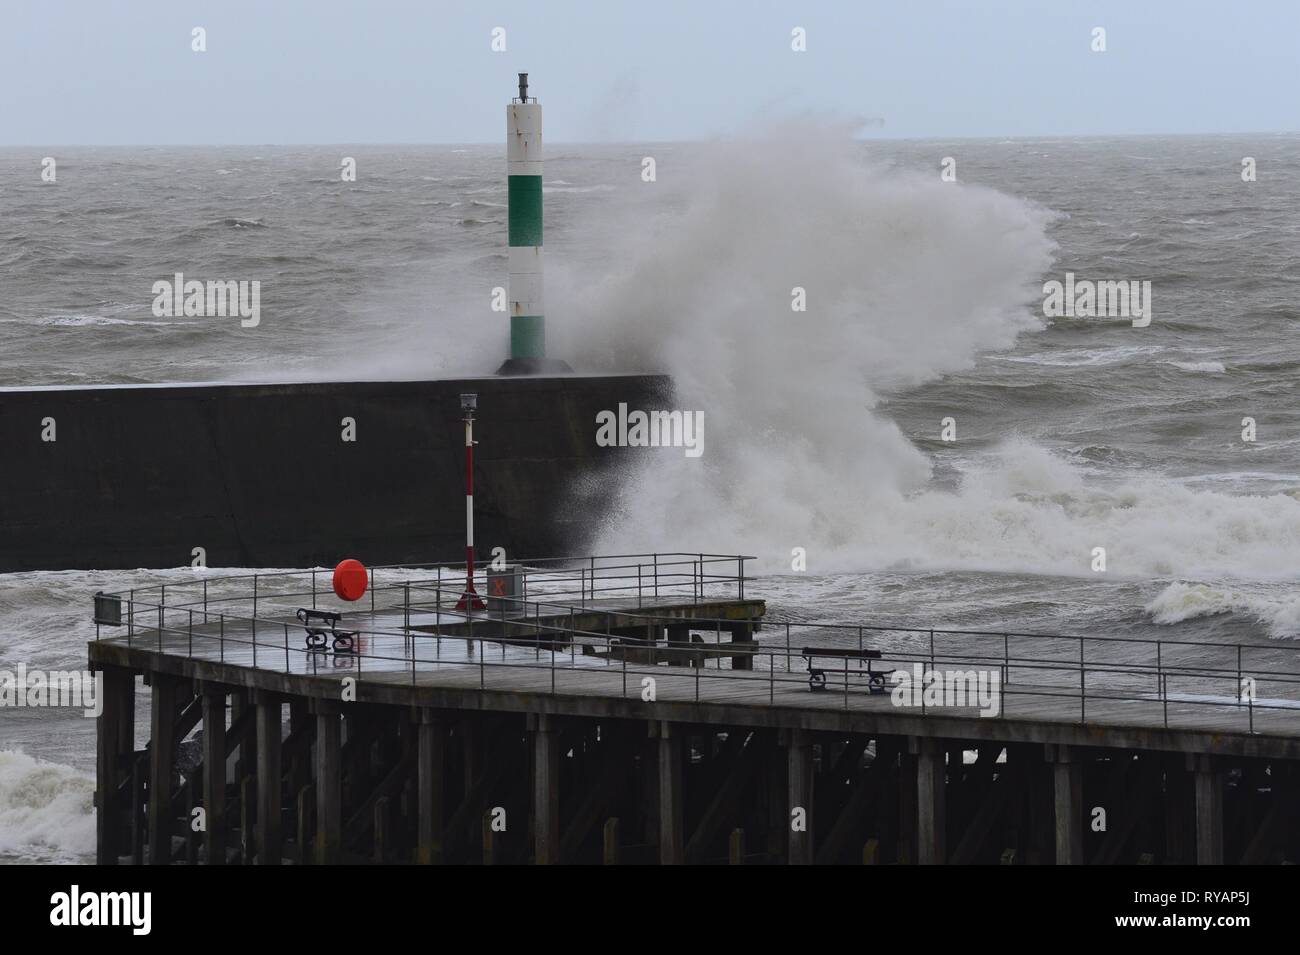 Aberystwyth Ceredigion Wales UK, Wednesday 13 March 2019. UK Weather: Storm Gareth, the latest named storm of the season, hits the seafront in Aberystwyth. The gale force winds of Storm Gareth are expected to bring damaging 70mph gusts to exposed Irish Sea coasts today. photo Credit: Keith Morris/Alamy Live News Stock Photo